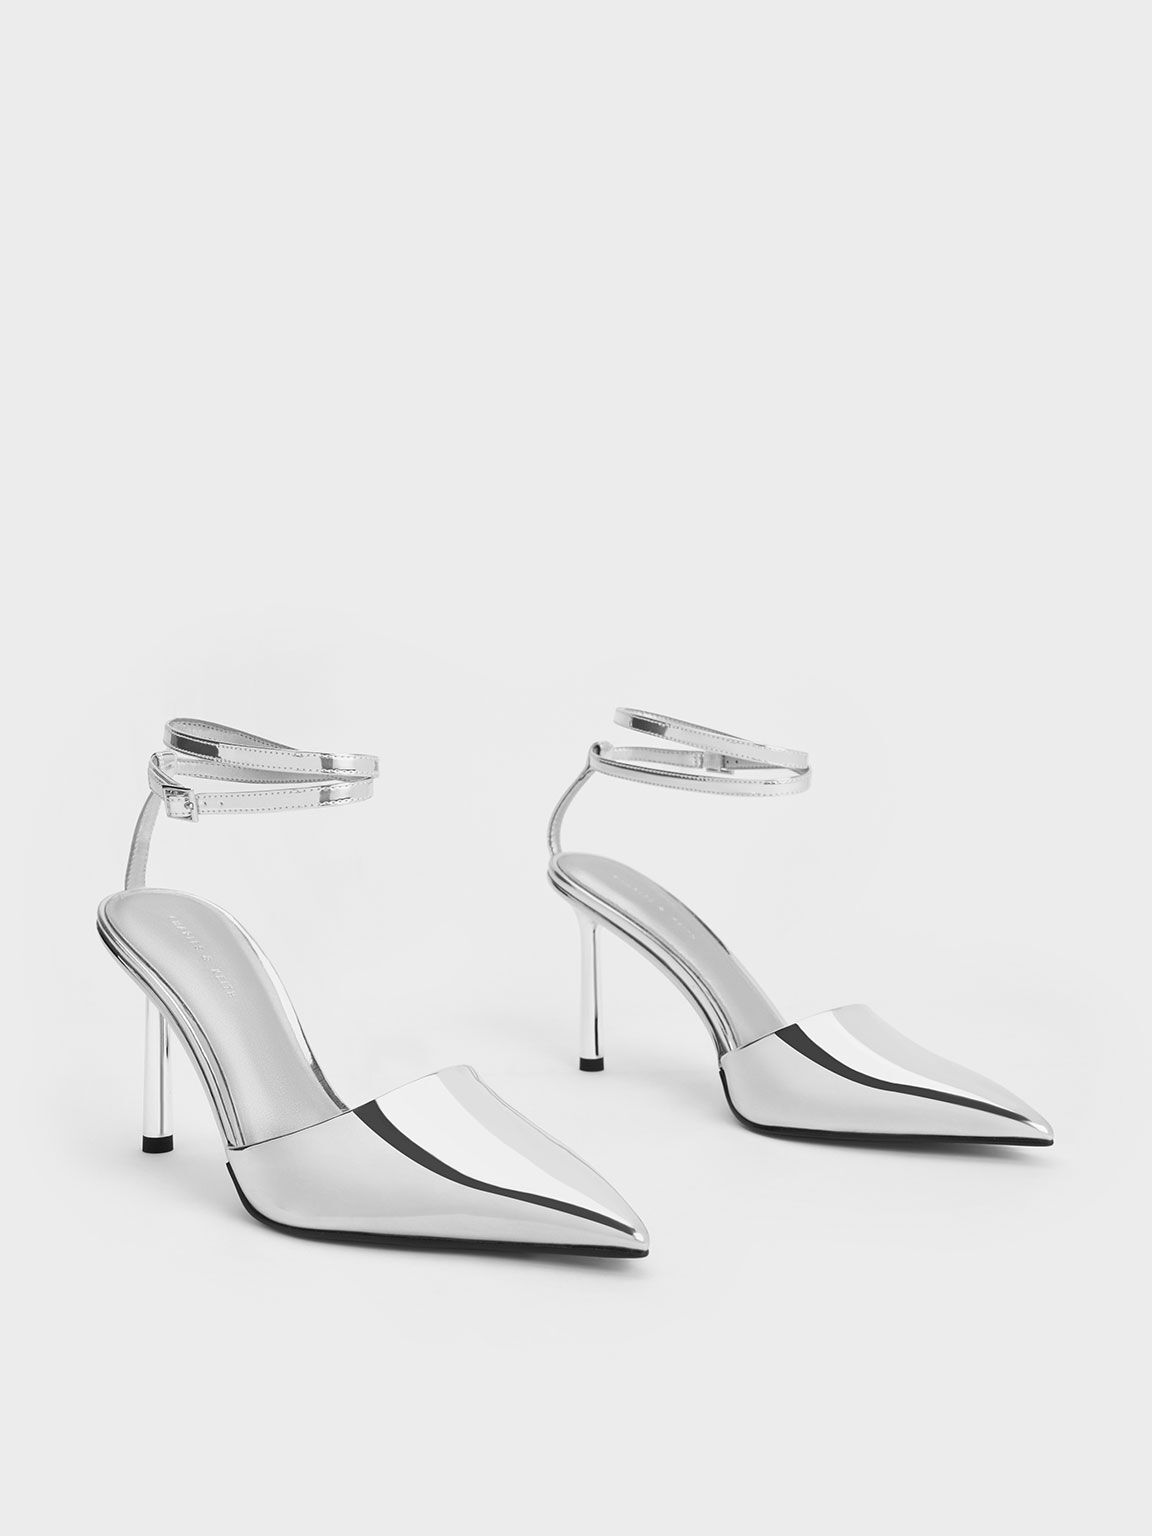 Metallic Patent Pointed-Toe Ankle-Strap Pumps - Silver